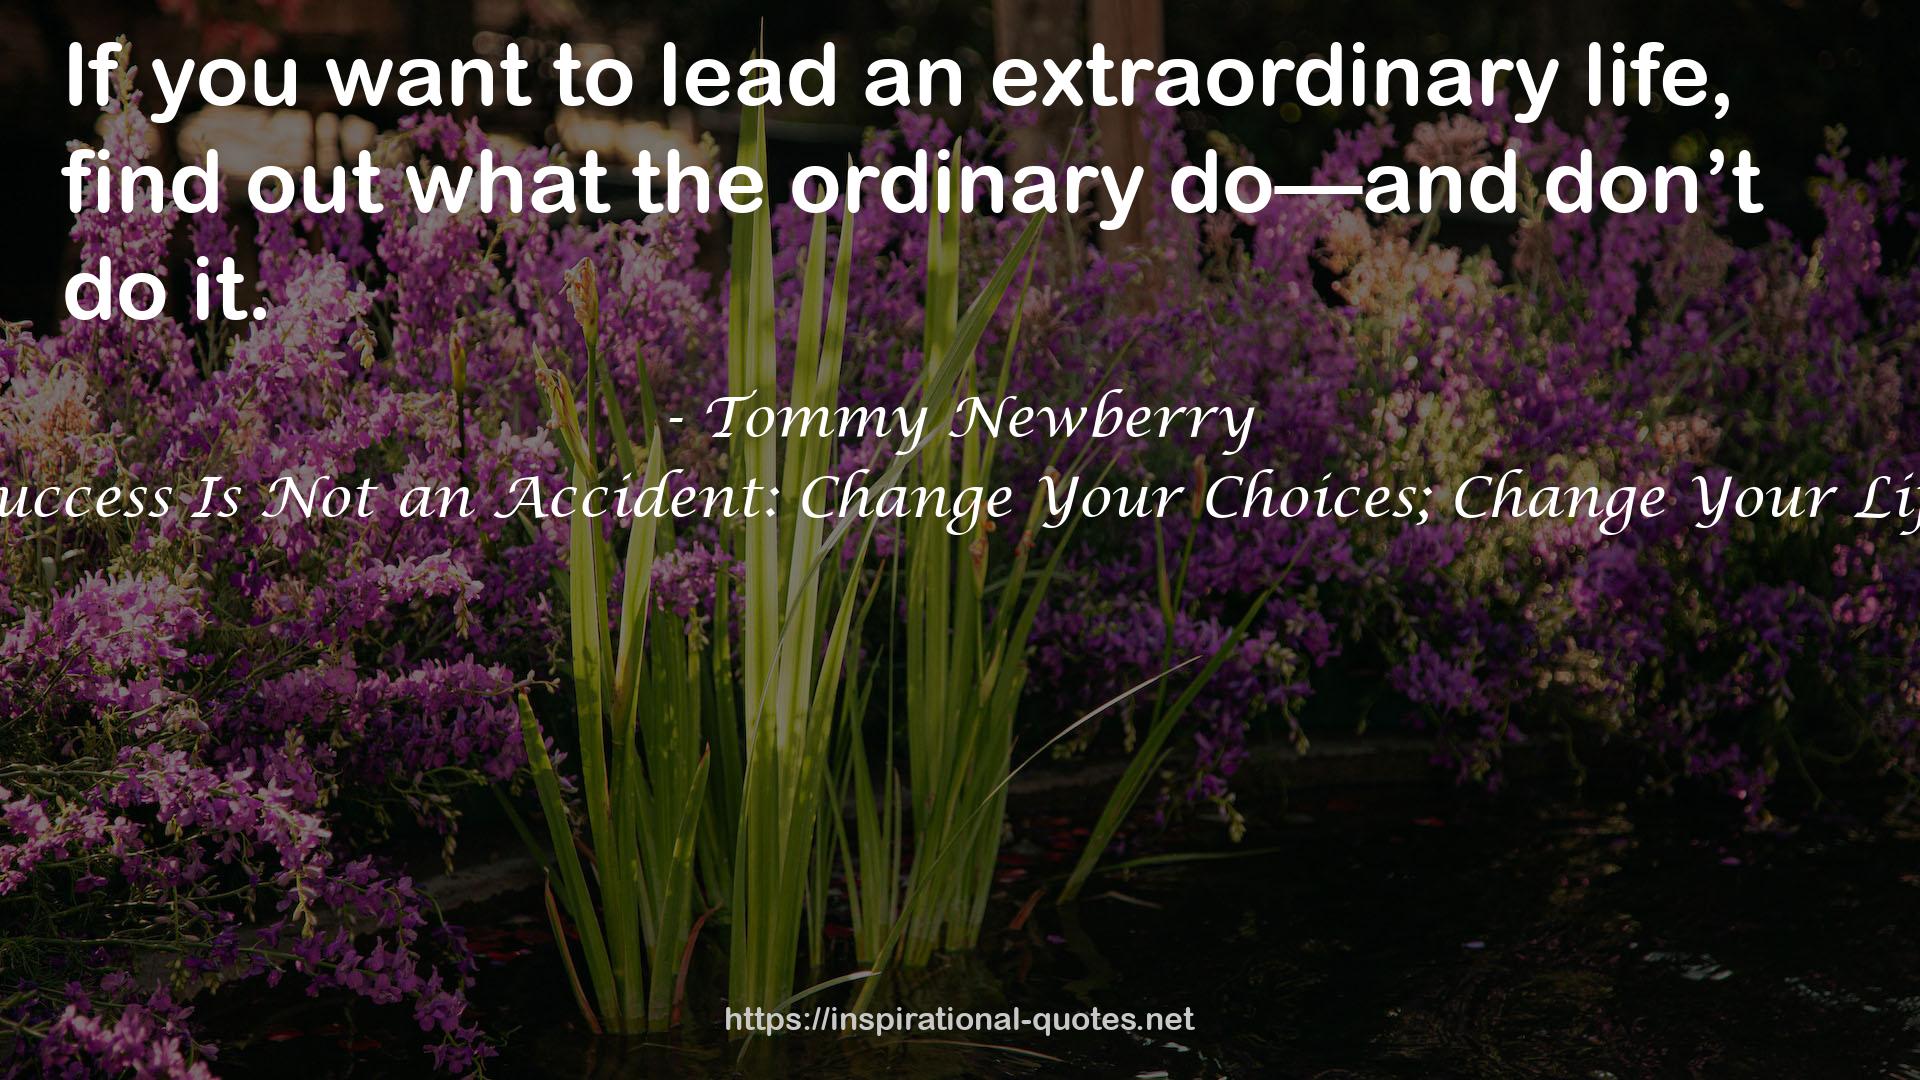 Tommy Newberry QUOTES